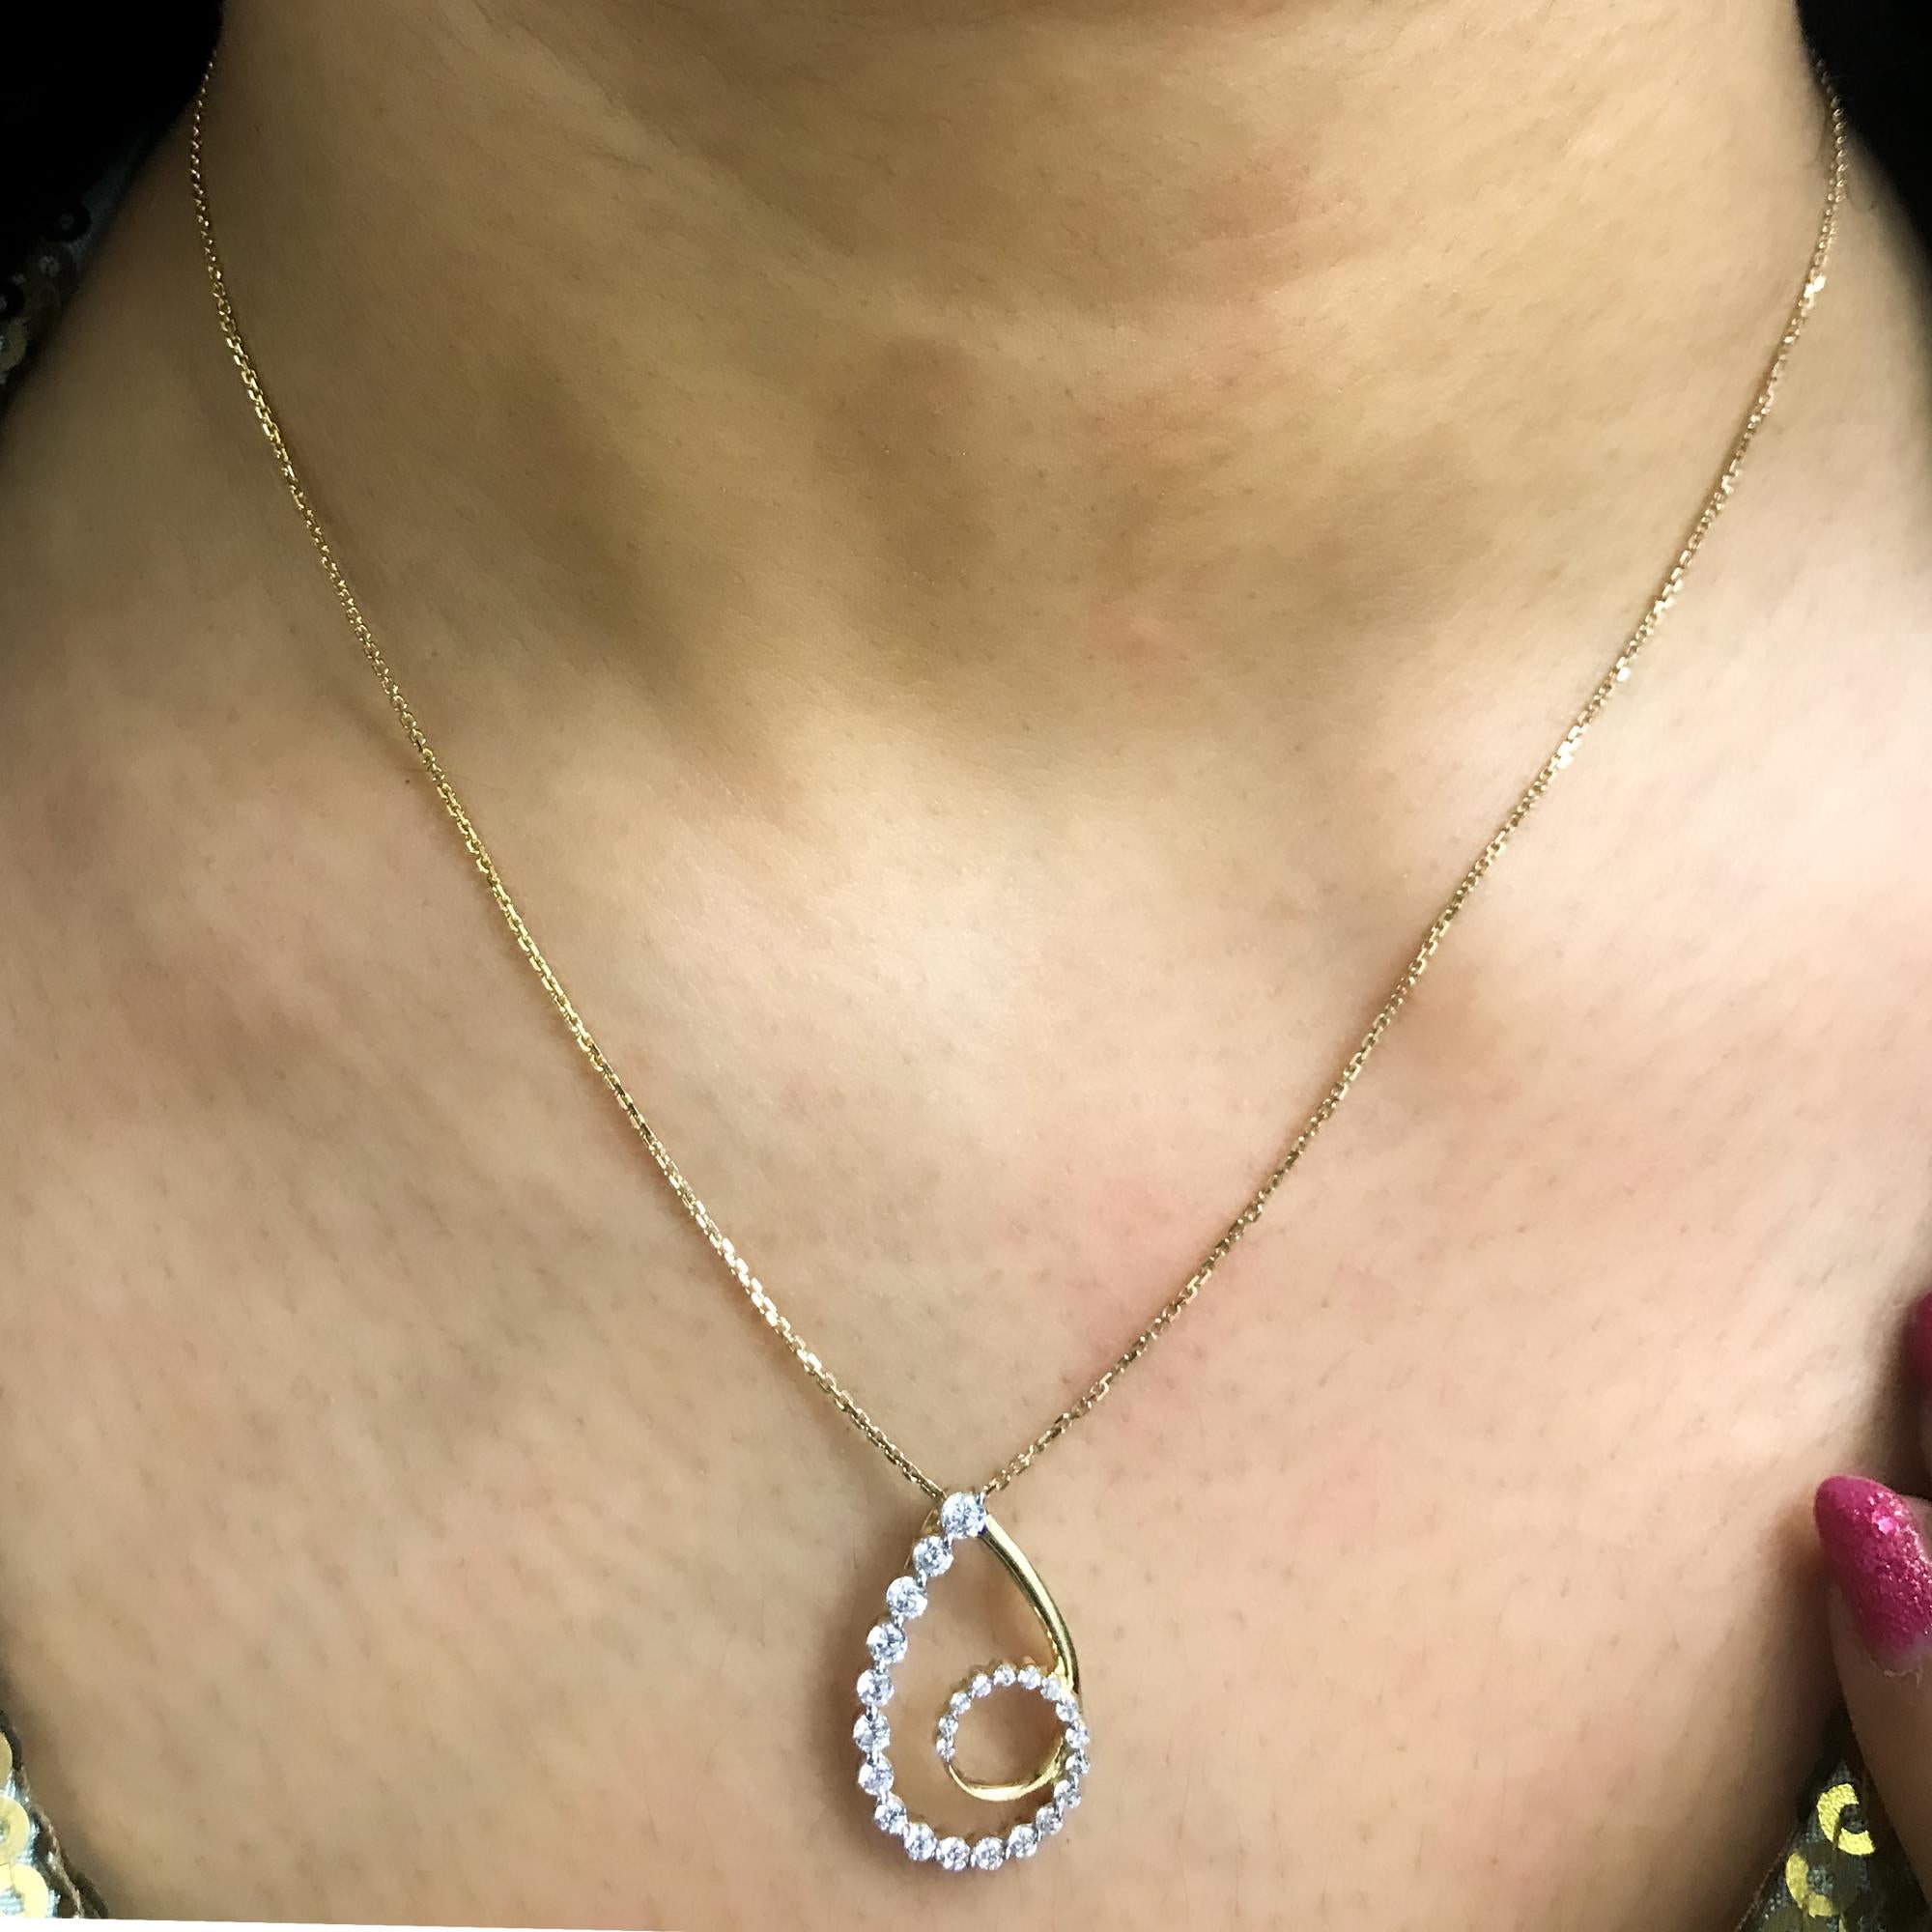 Experience dazzling diamonds with this magnificent studded pendant that’s sure to steal all the attention. The pear shaped pendant is crafted from 14 karat gold in your choice of white, rose, or yellow, and features Round Brilliant 24 white